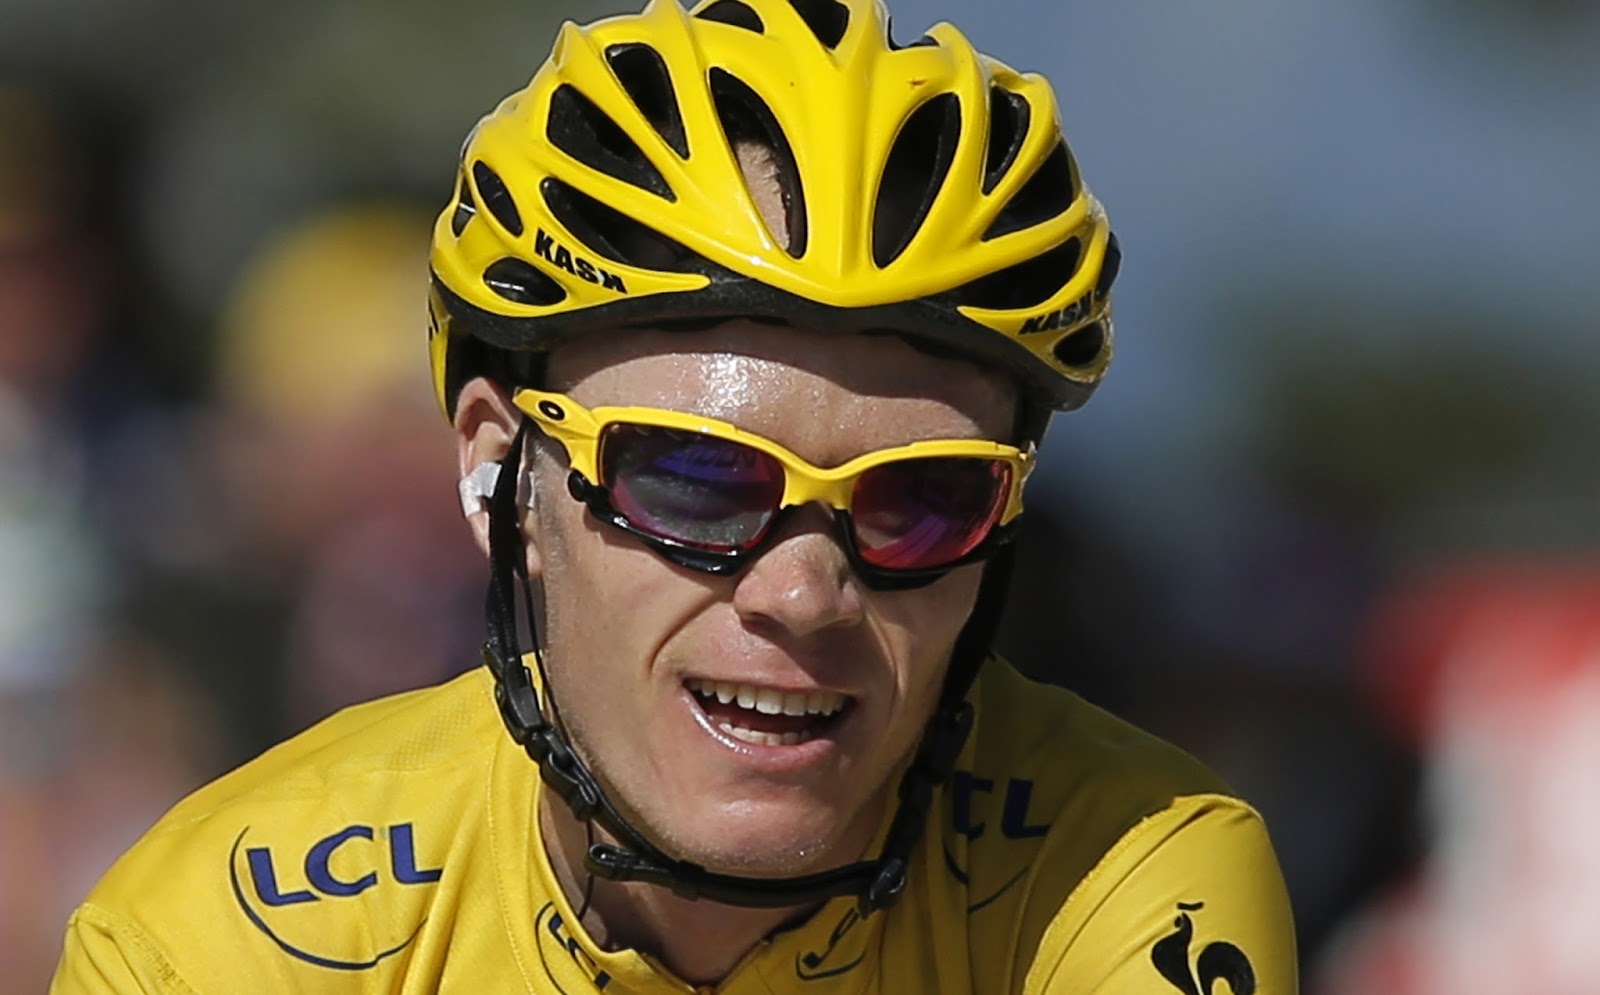 CHRIS FROOME 8